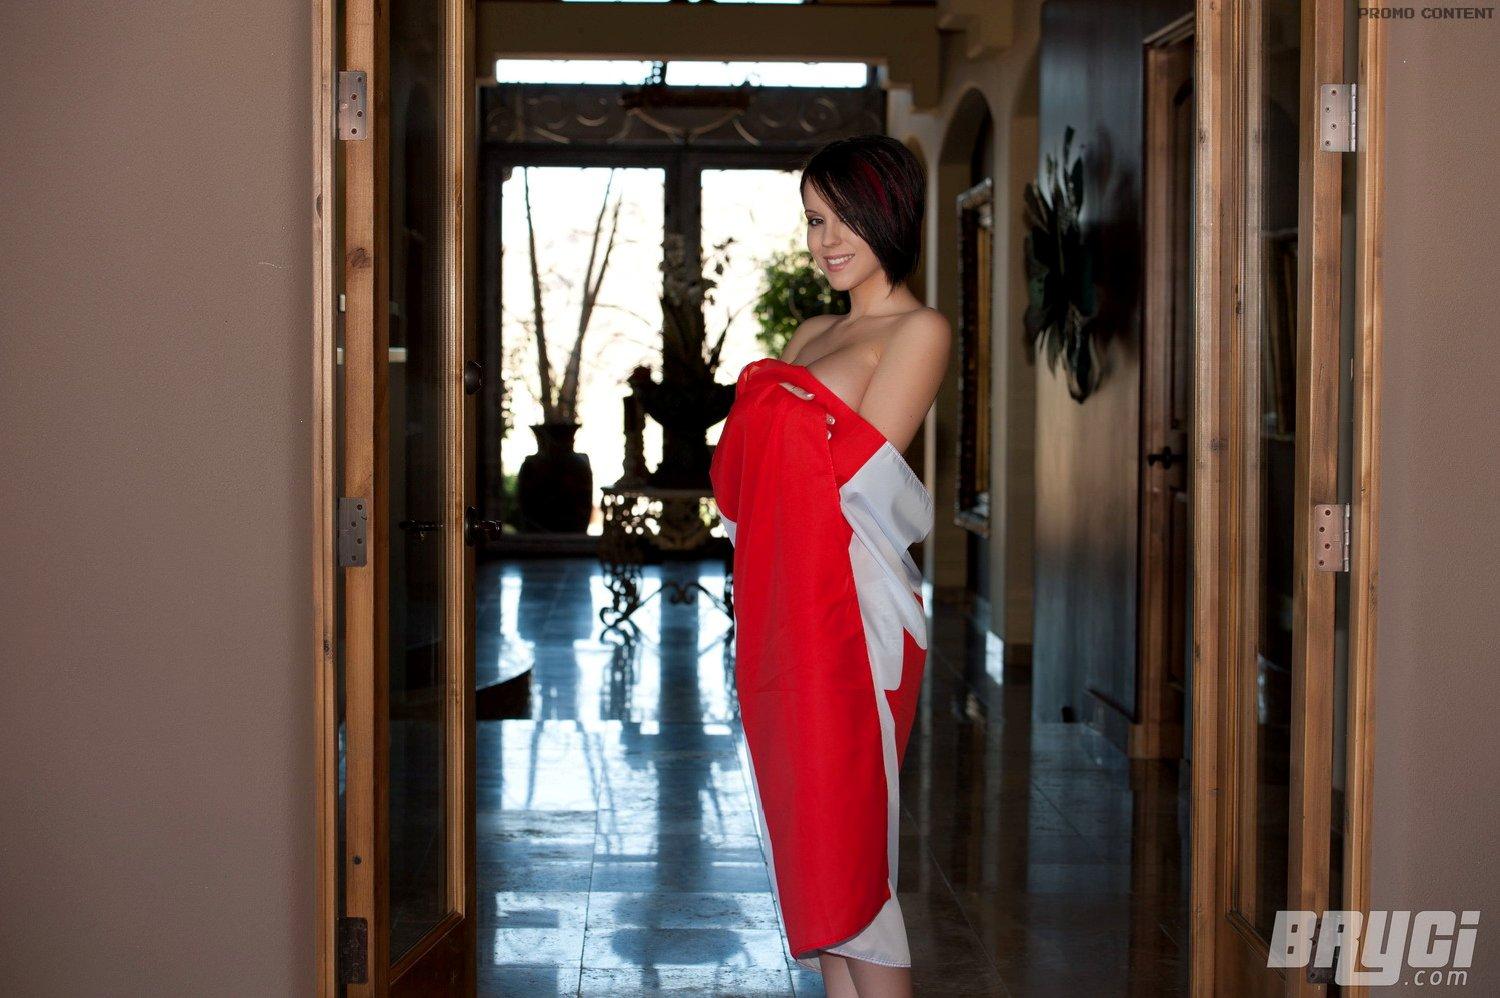 Bryci shows her love for Canada! #53572023